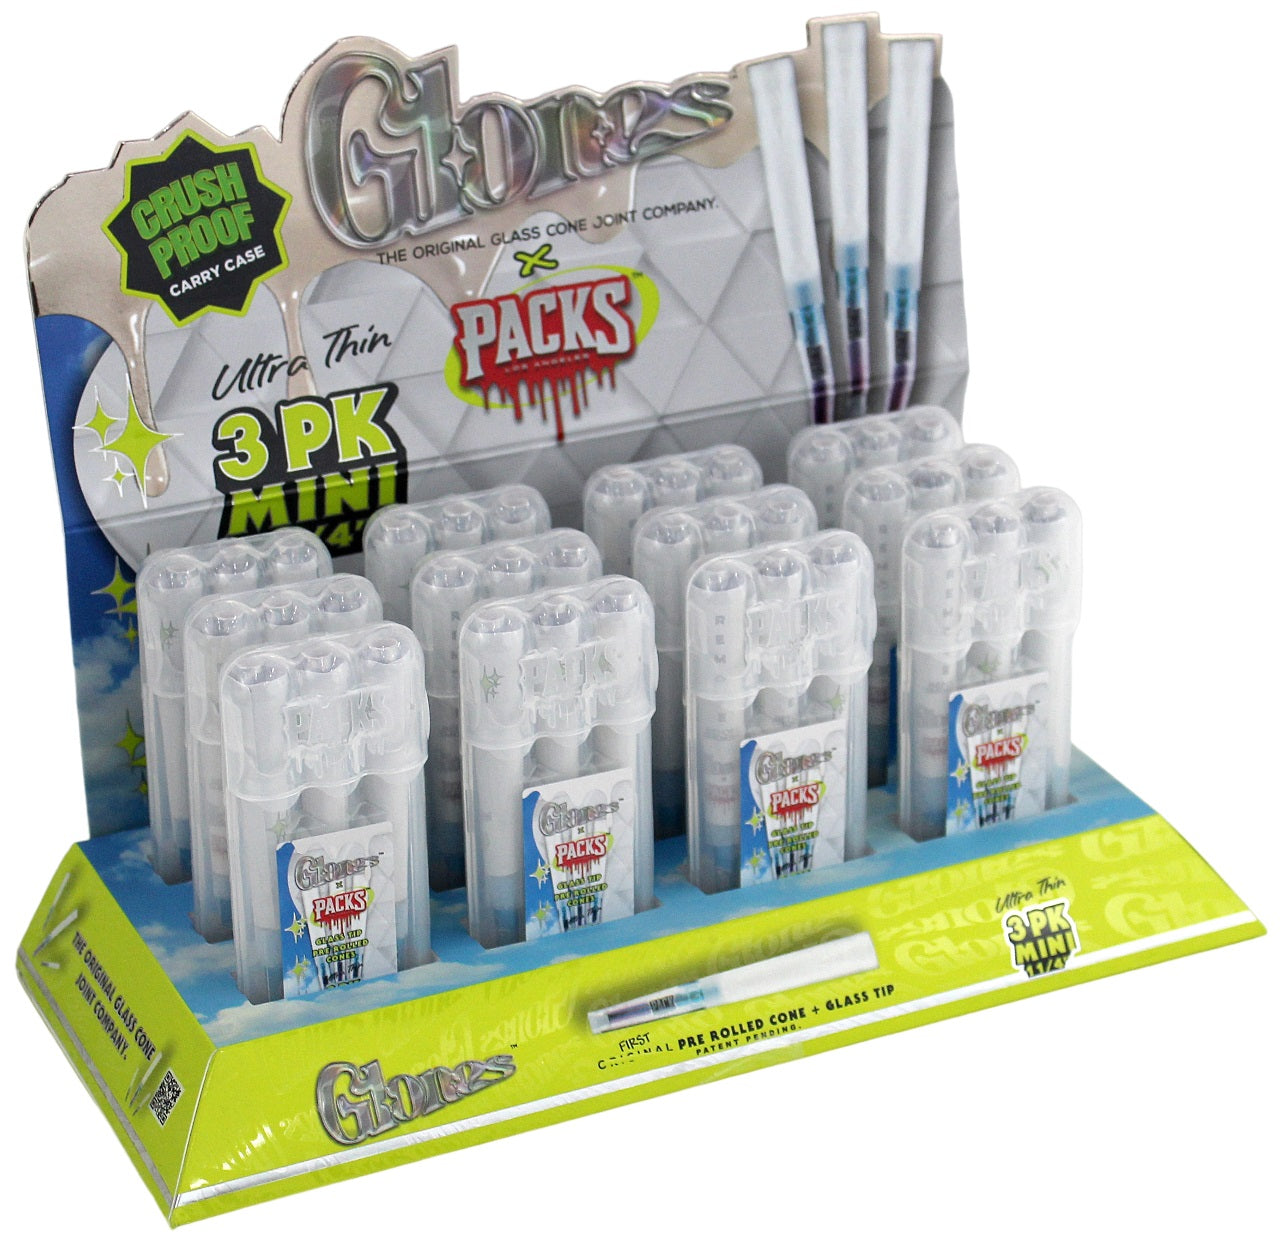 Glones Pre Rolled Cones with Glass Tips - 3pk 1 1/4